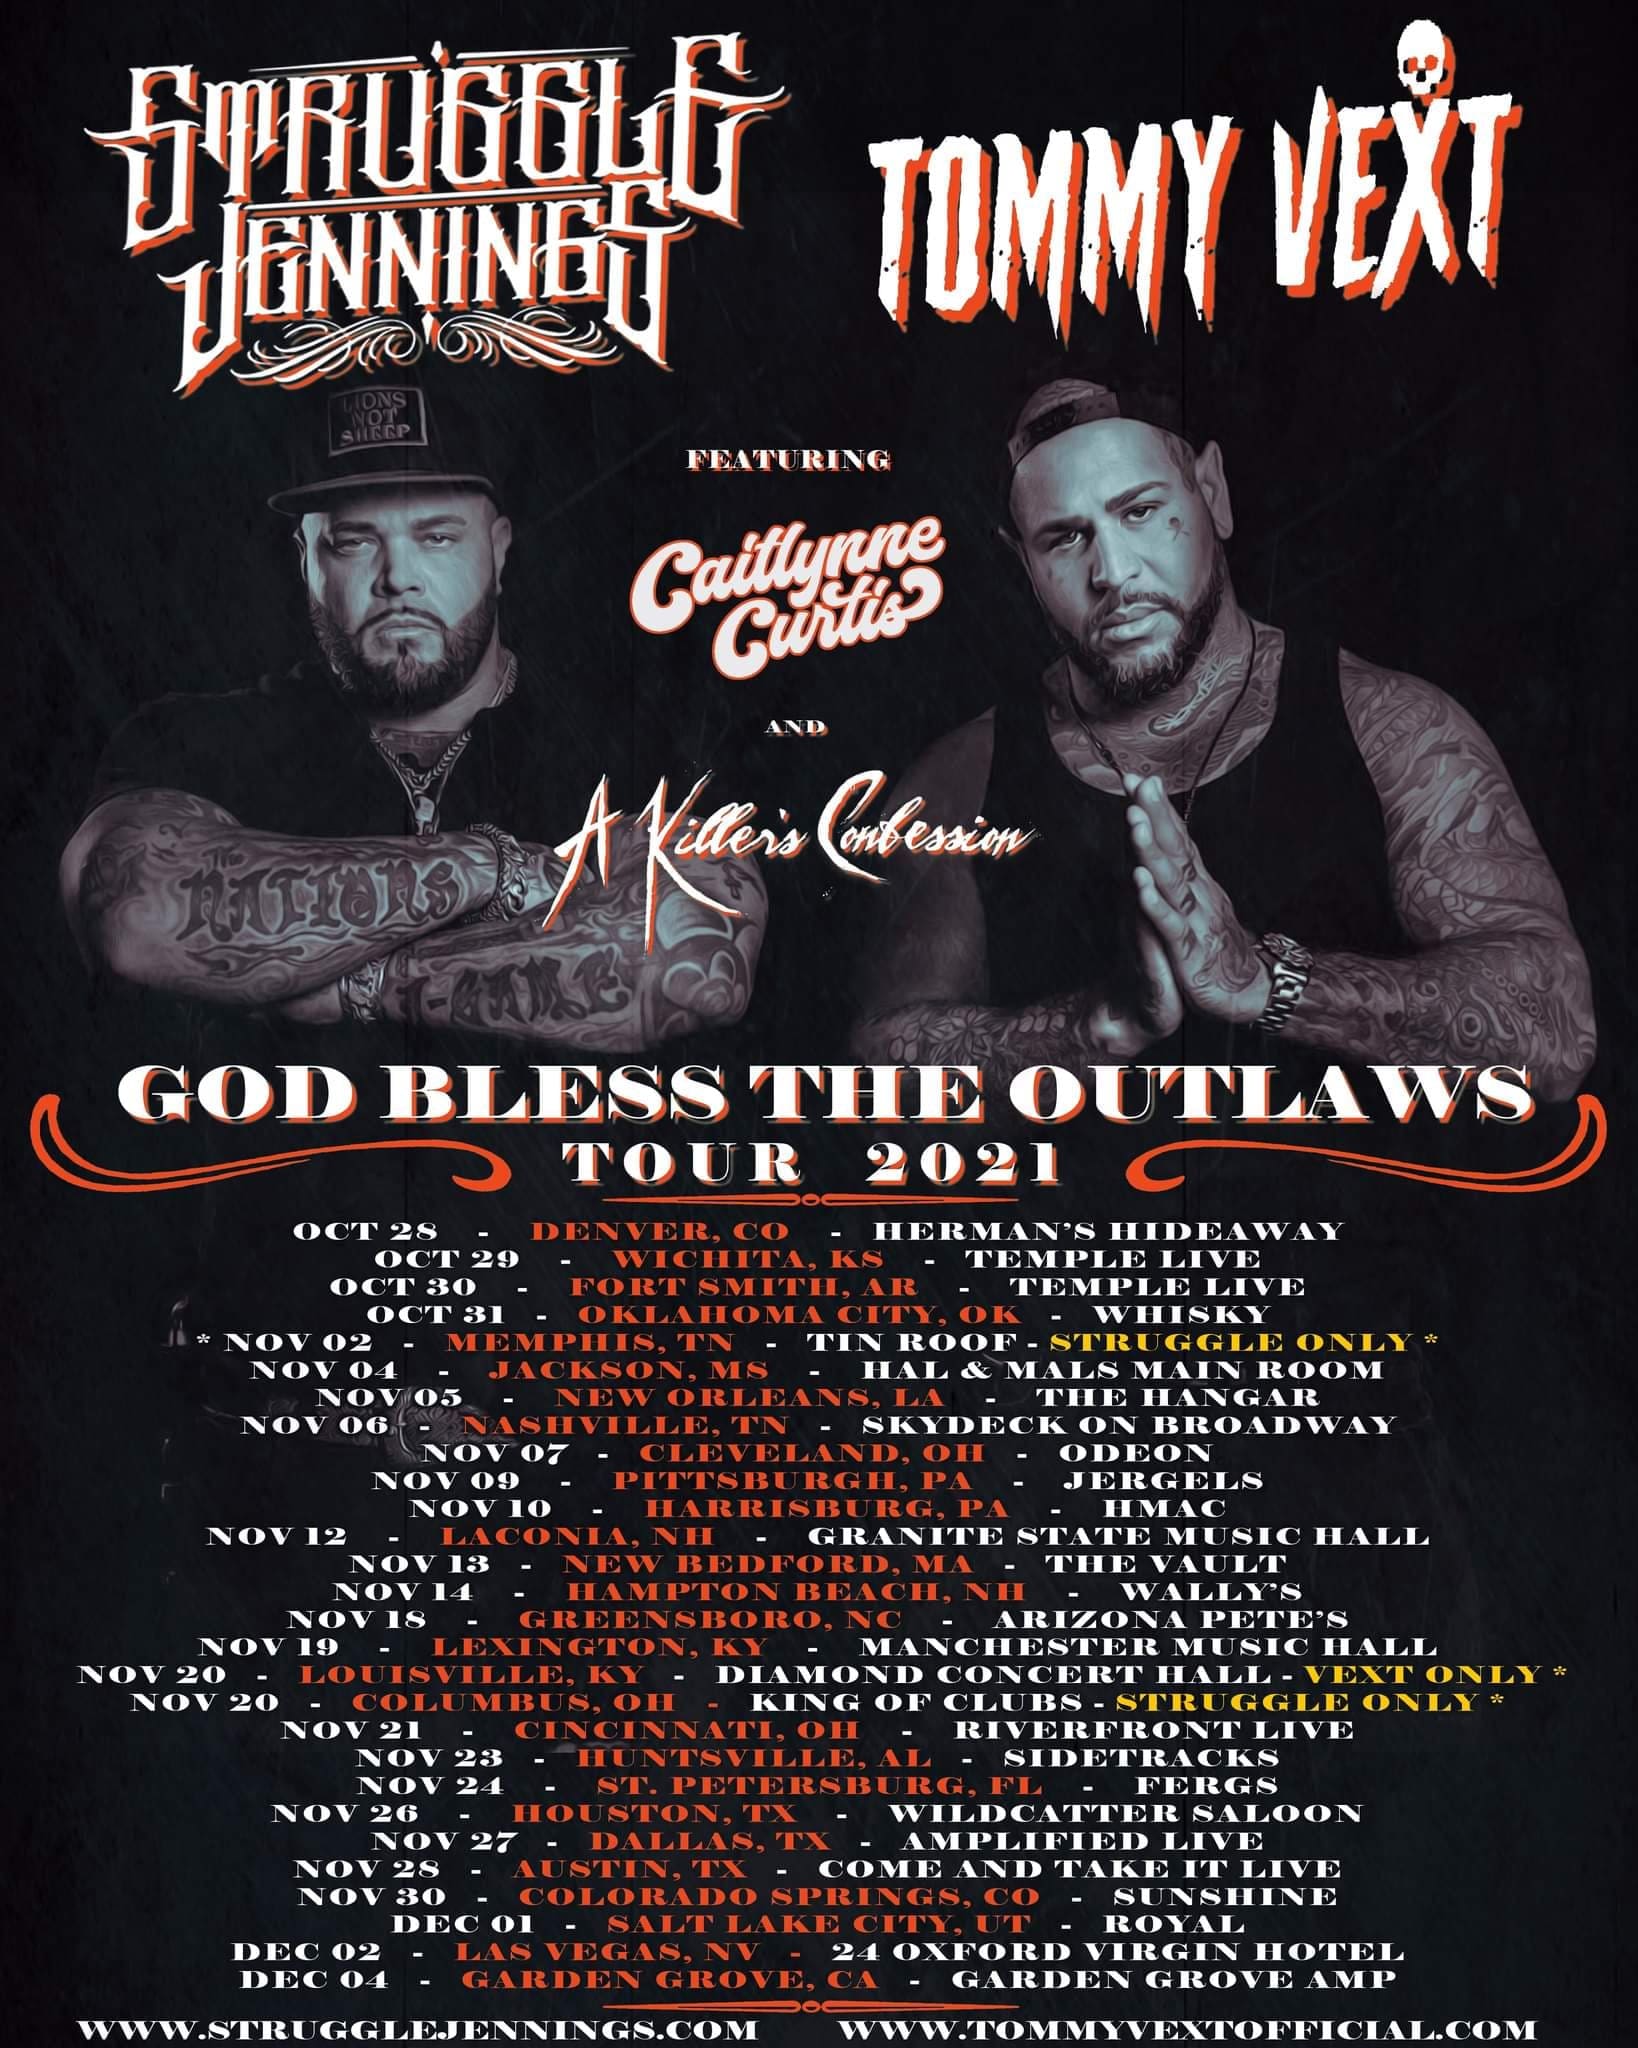 God Bless The Outlaws Tour